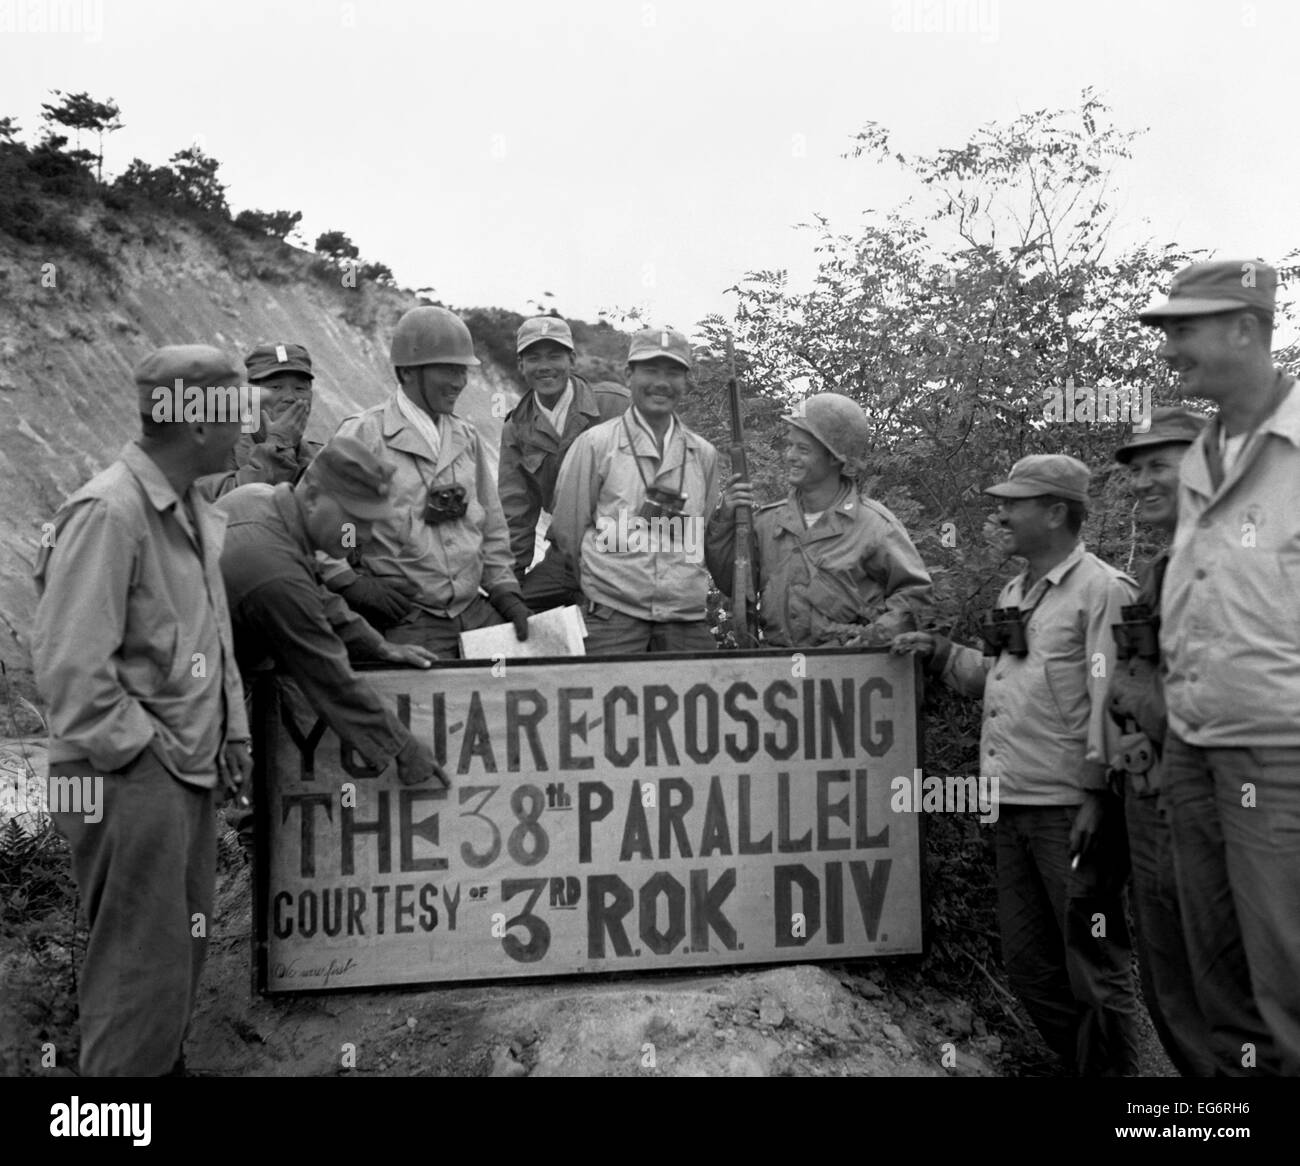 First UN troops to cross the 38th Parallel hold a sign posting ceremony. The 3rd ROK (Republic of Korea) Division made the Stock Photo